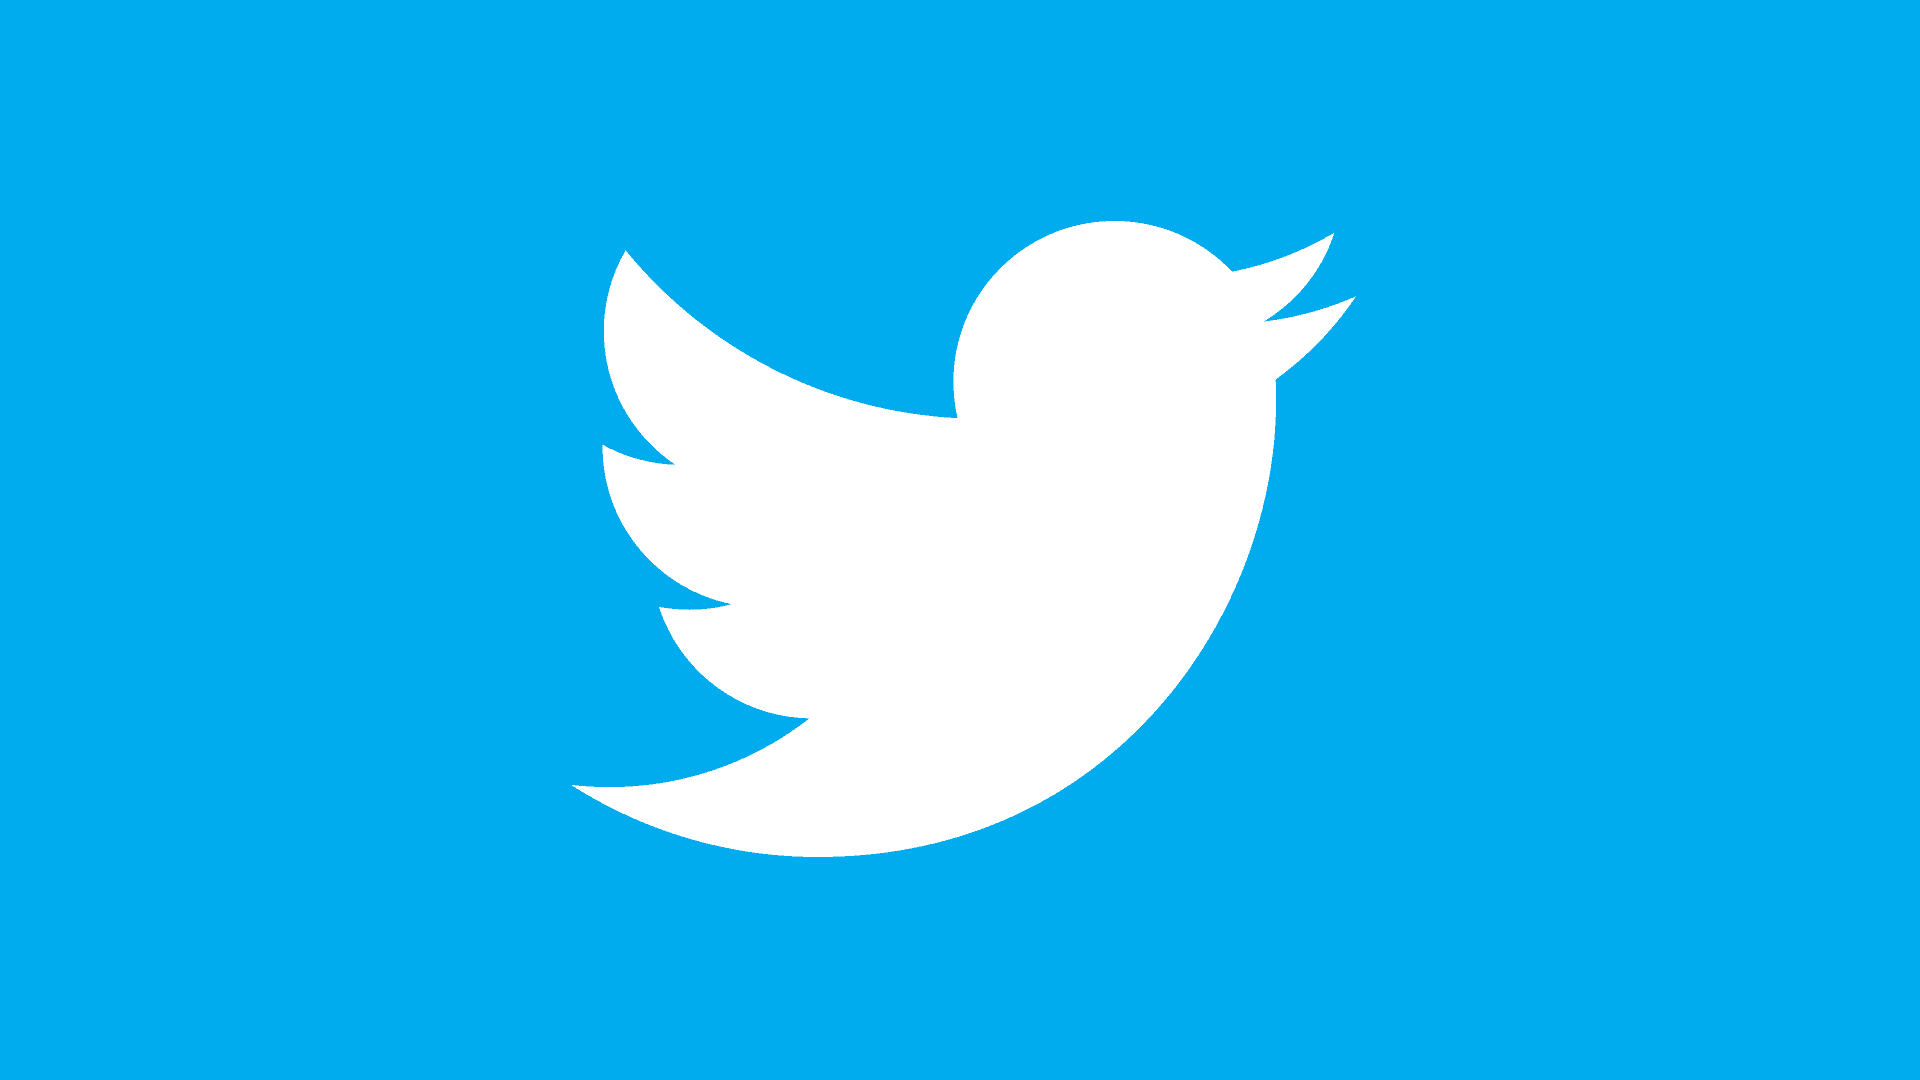 10+ Twitter HD Wallpapers and Backgrounds